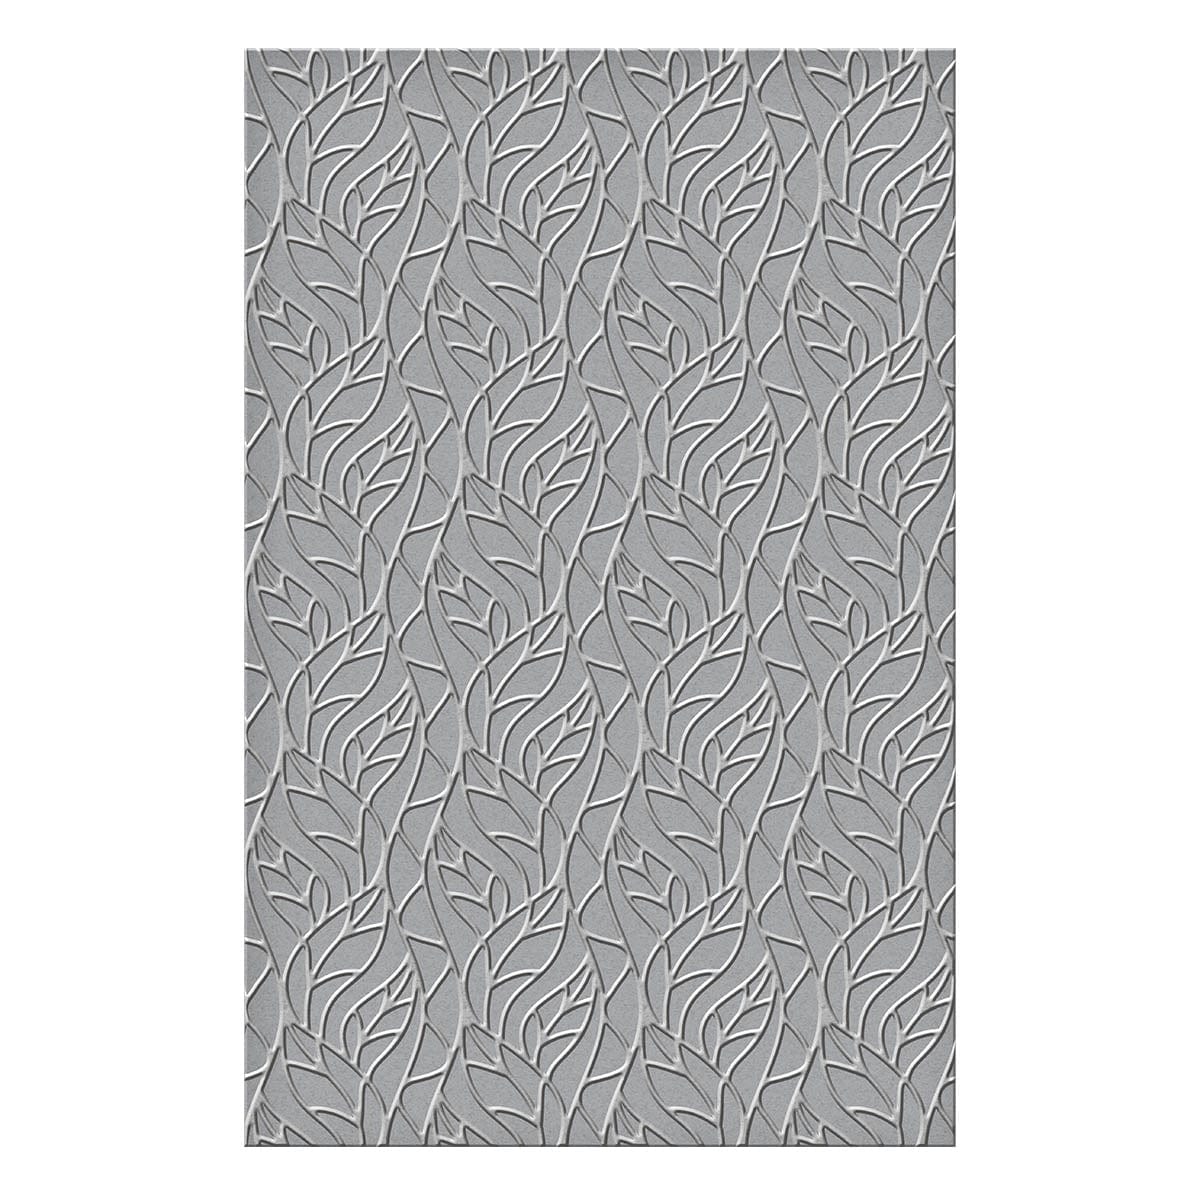 Leafy Helix Embossing Folder from the Propagation Garden Collection by Annie Williams